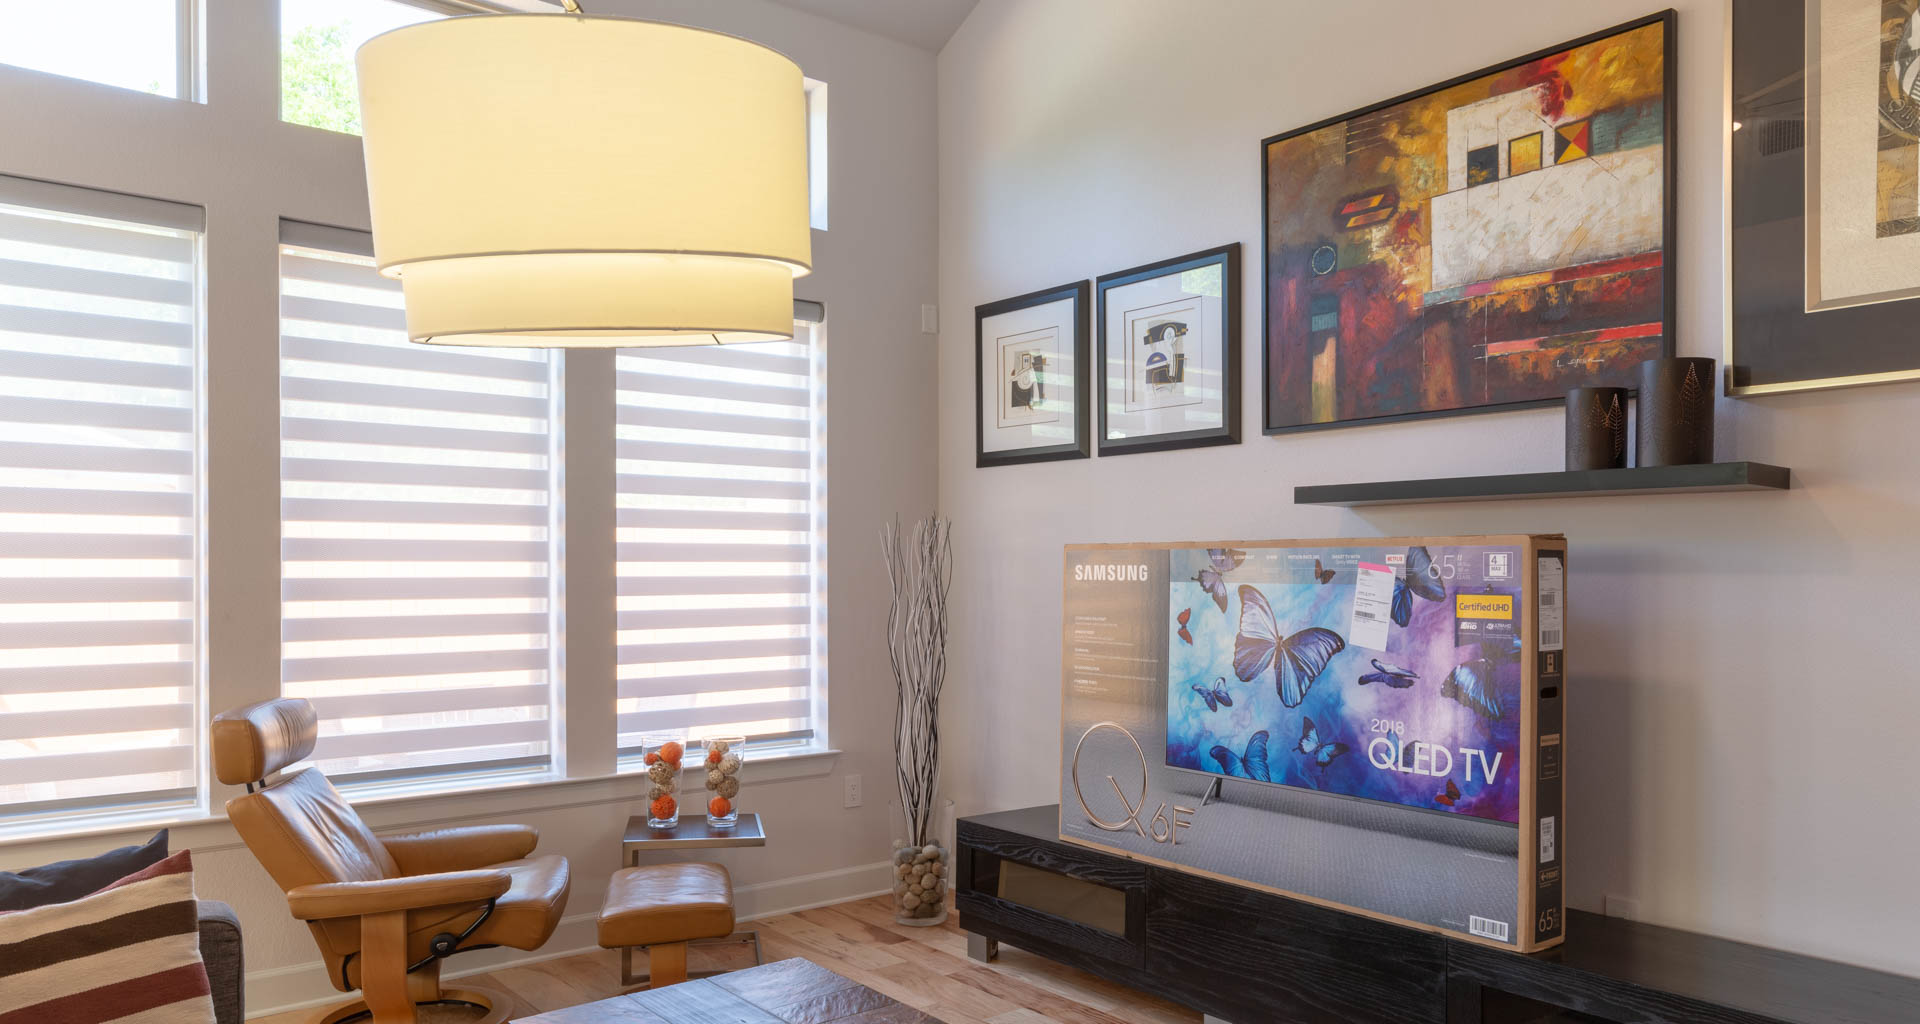 Our Samsung QLED TV prior to installation. Image: Digitized House.